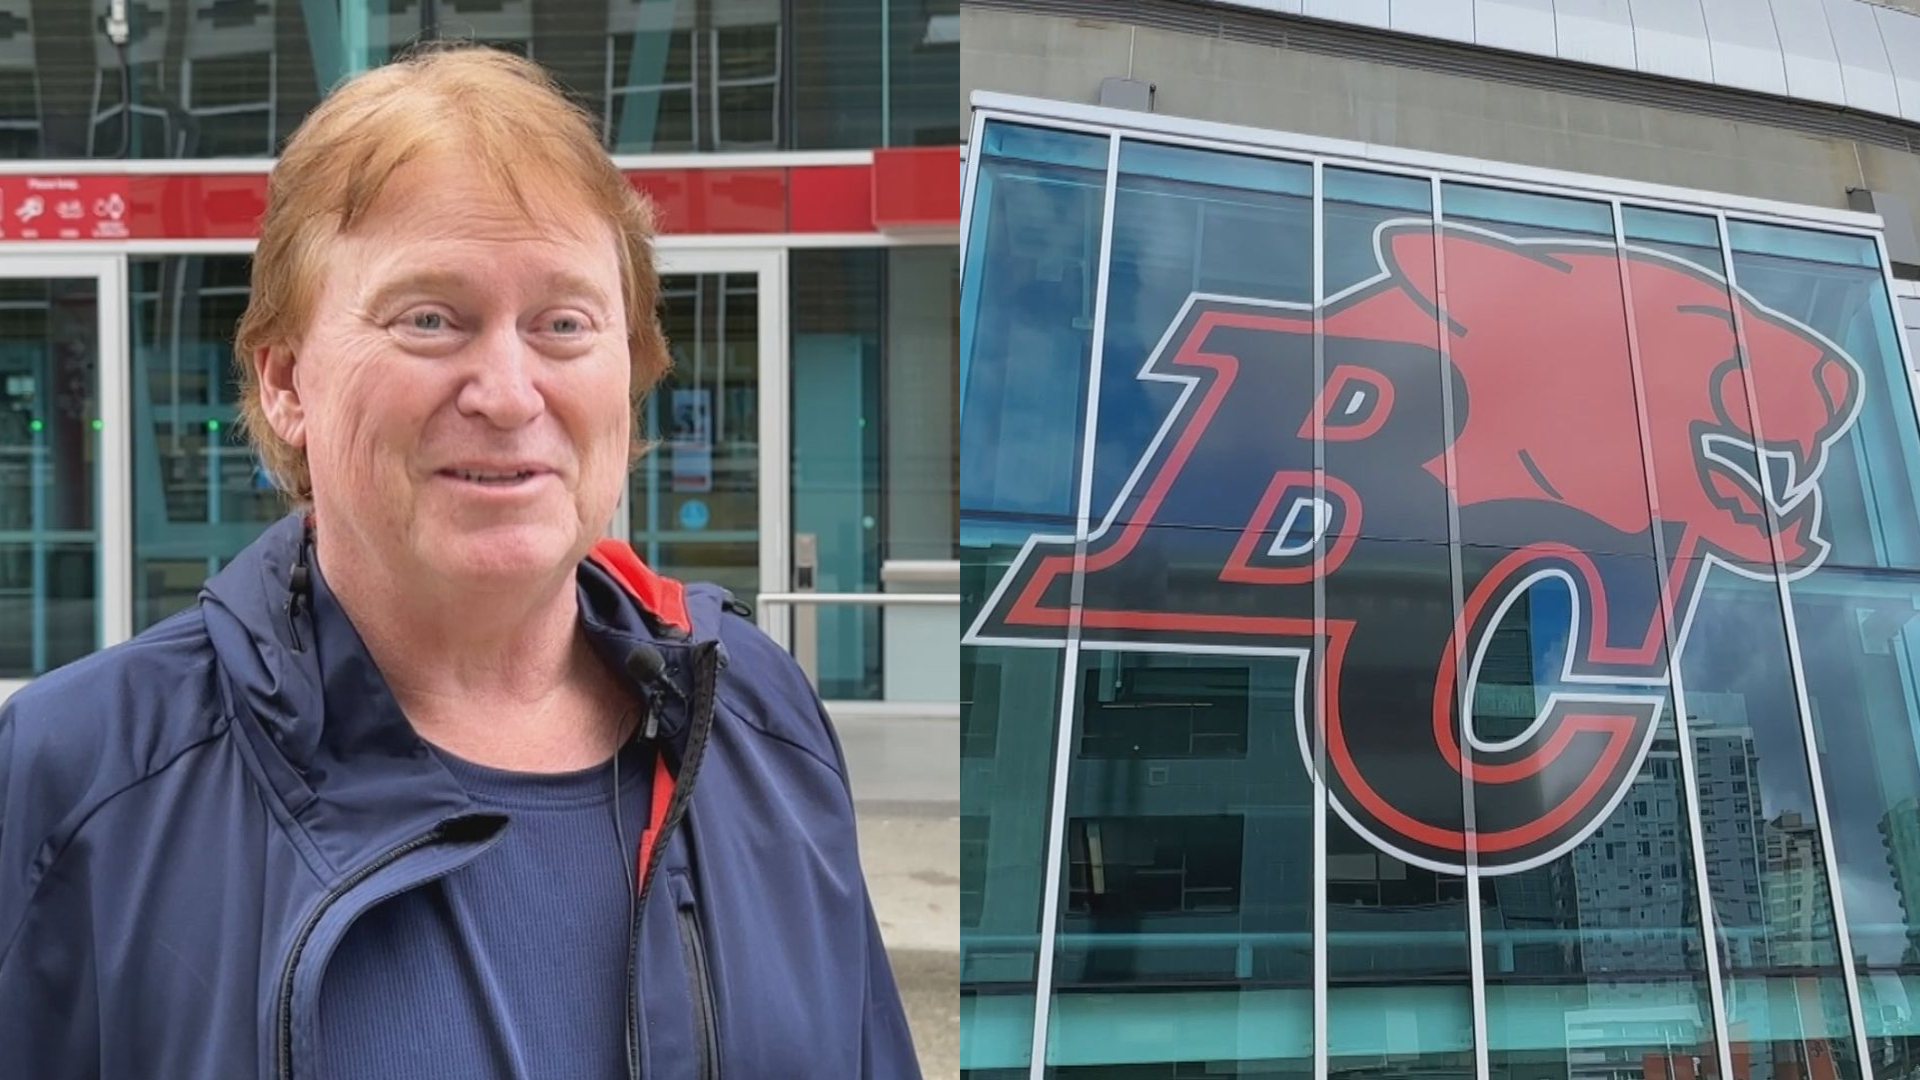 BC Lions fan frustrated by Ticketmaster’s ‘dynamic’ pricing model